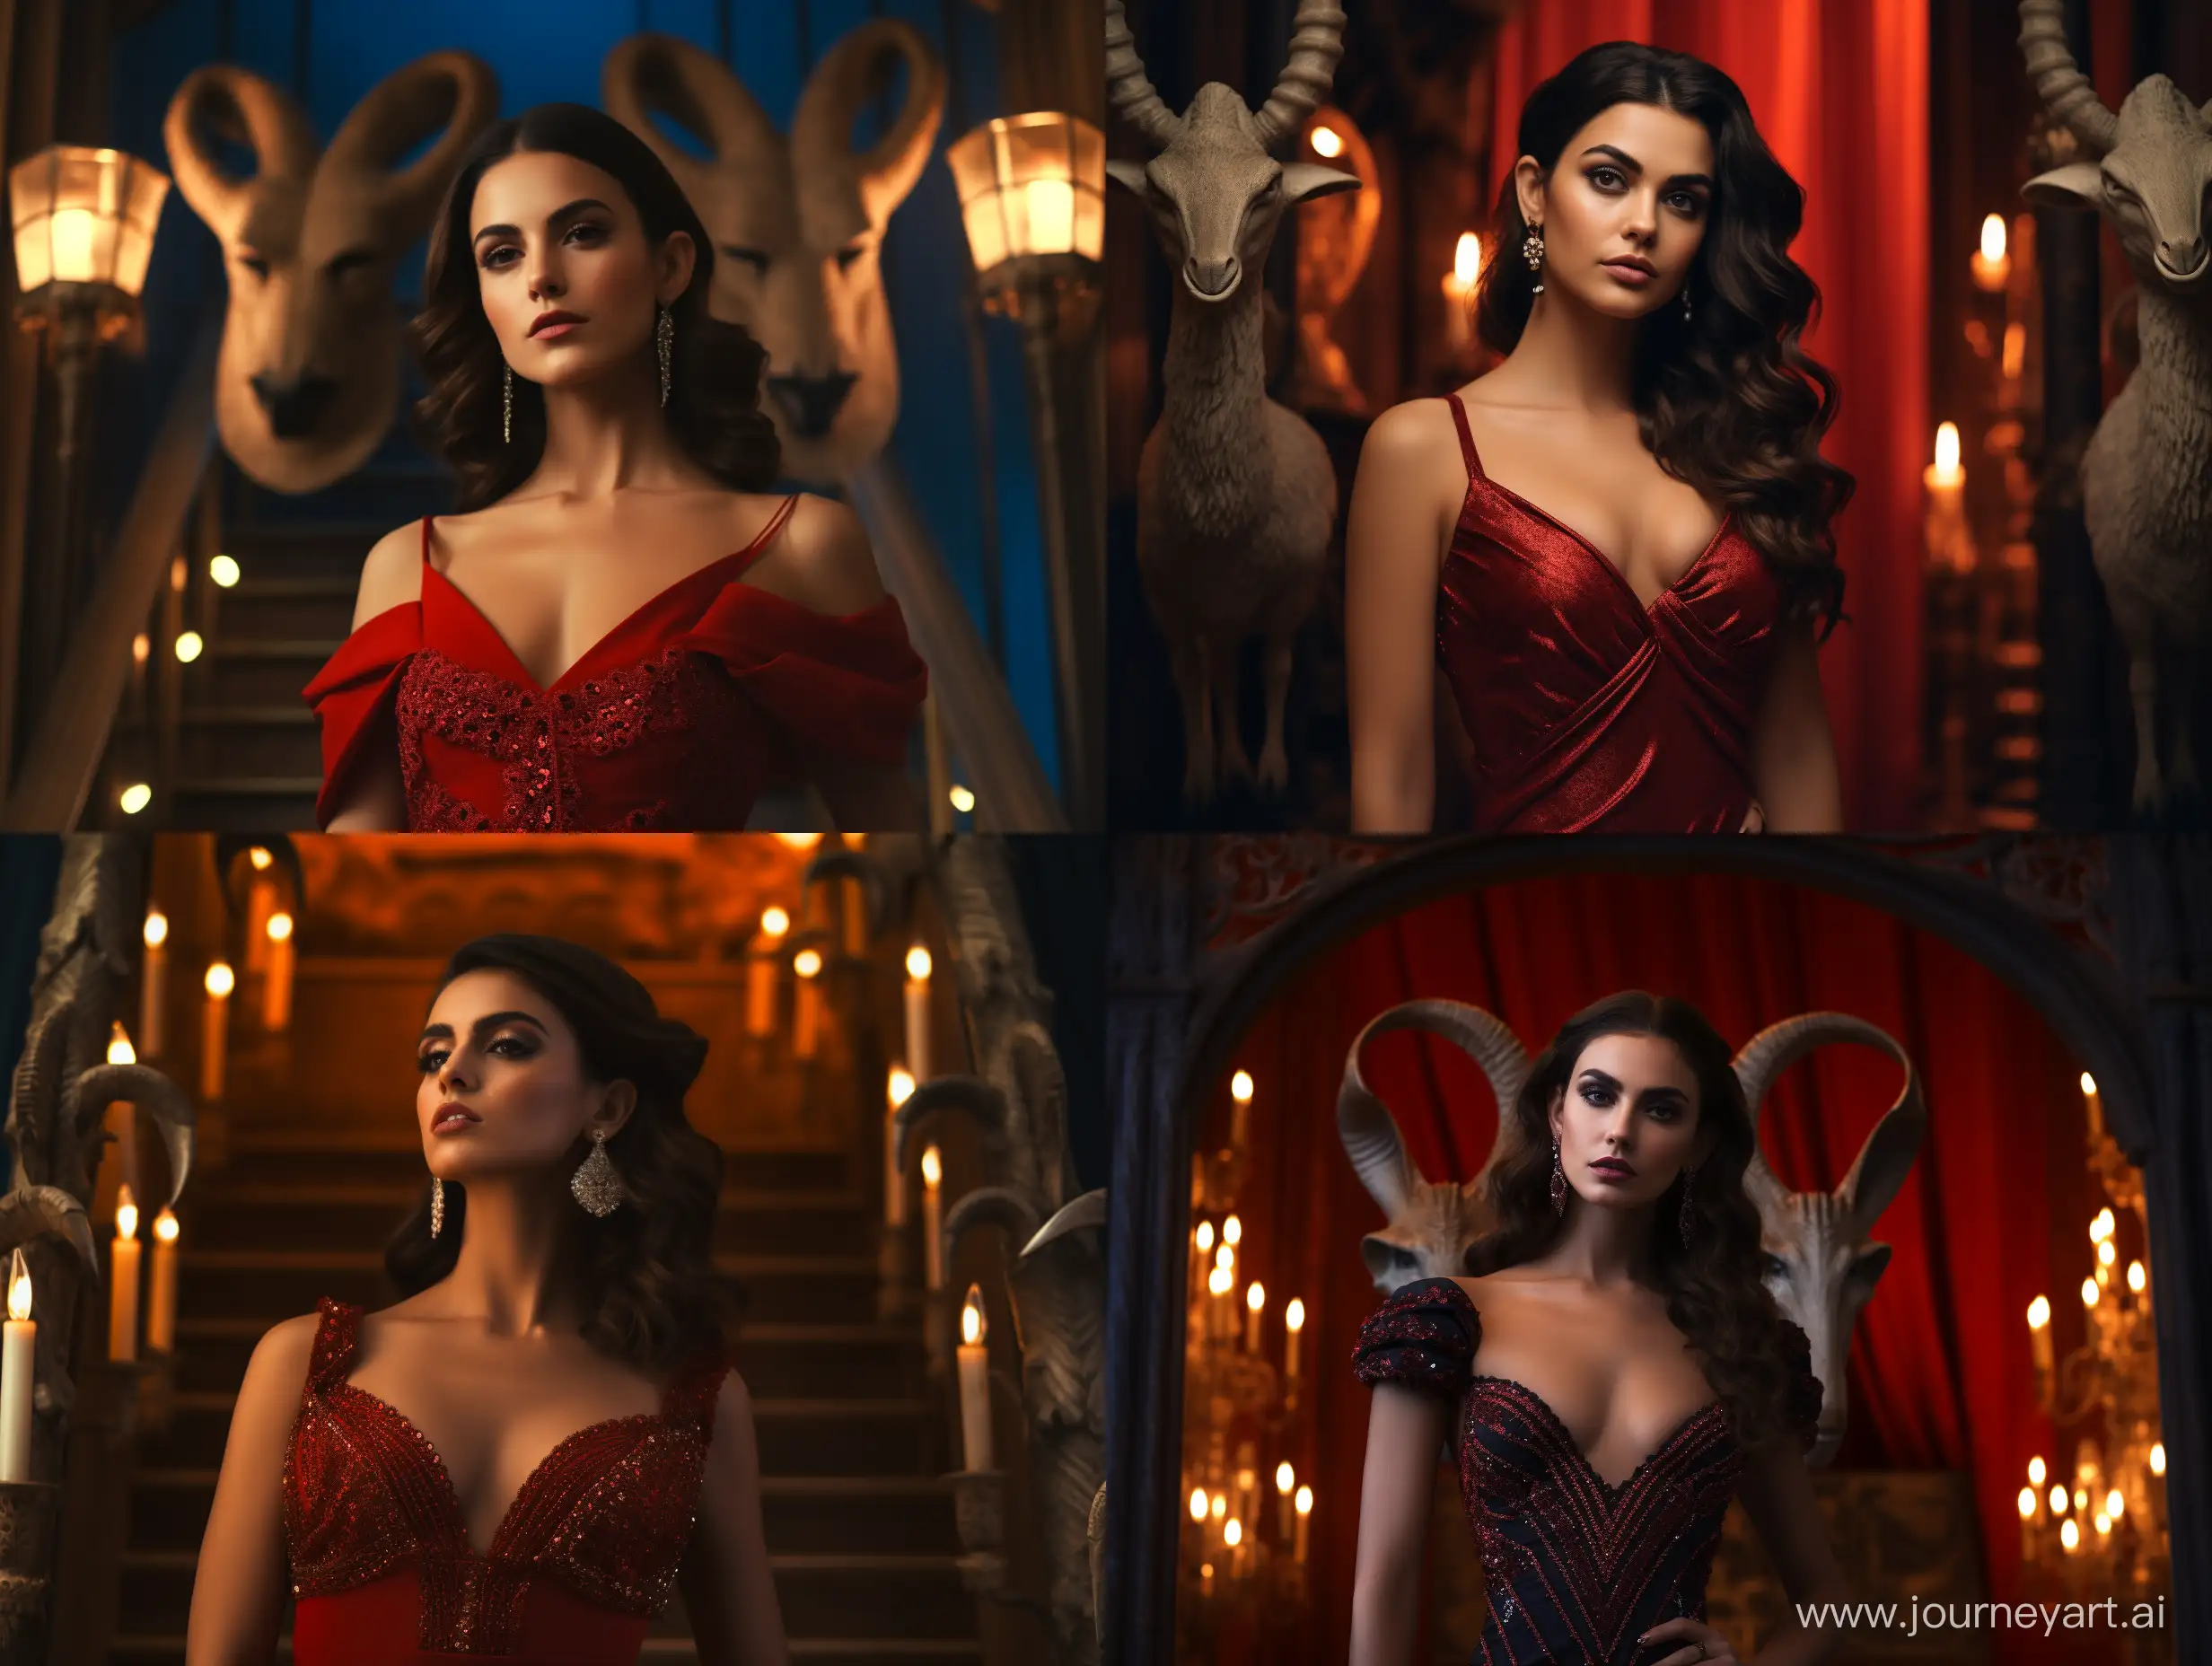 Elegant-DarkHaired-Girl-with-Sheep-Horns-and-Cleopatra-Makeup-in-Red-Evening-Gown